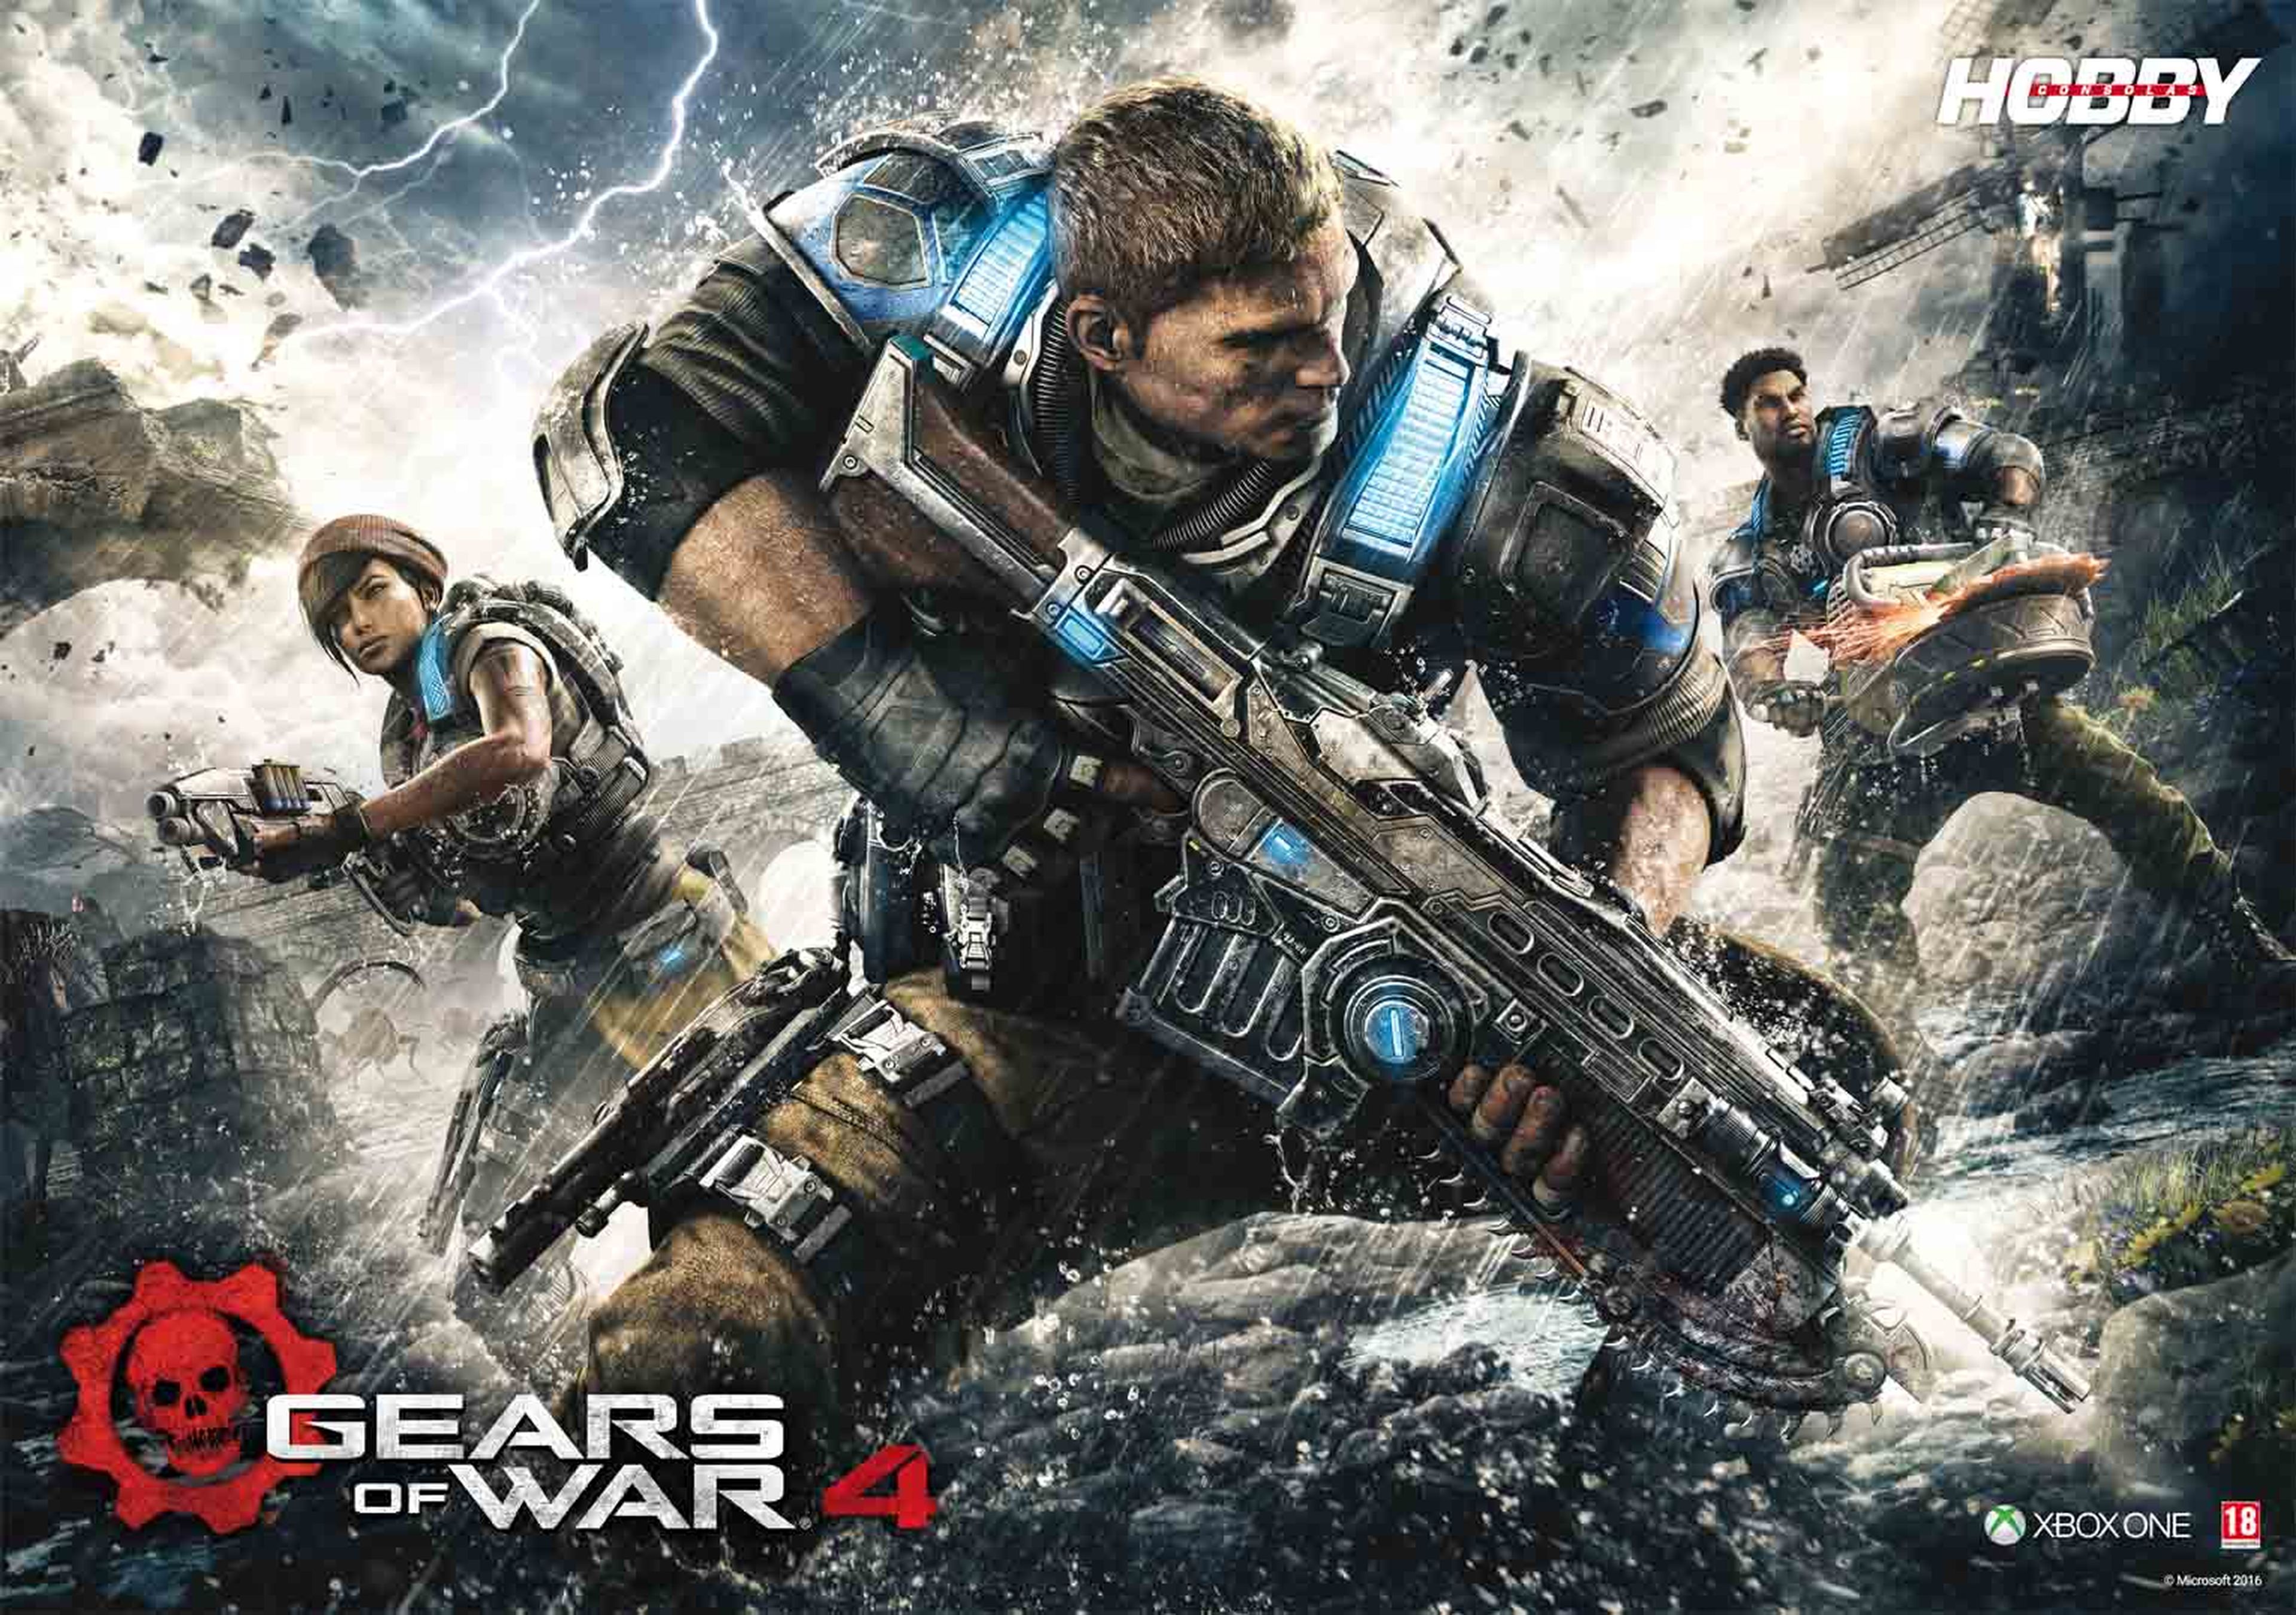 Hobby Consolas 302 poster Gears of War 4